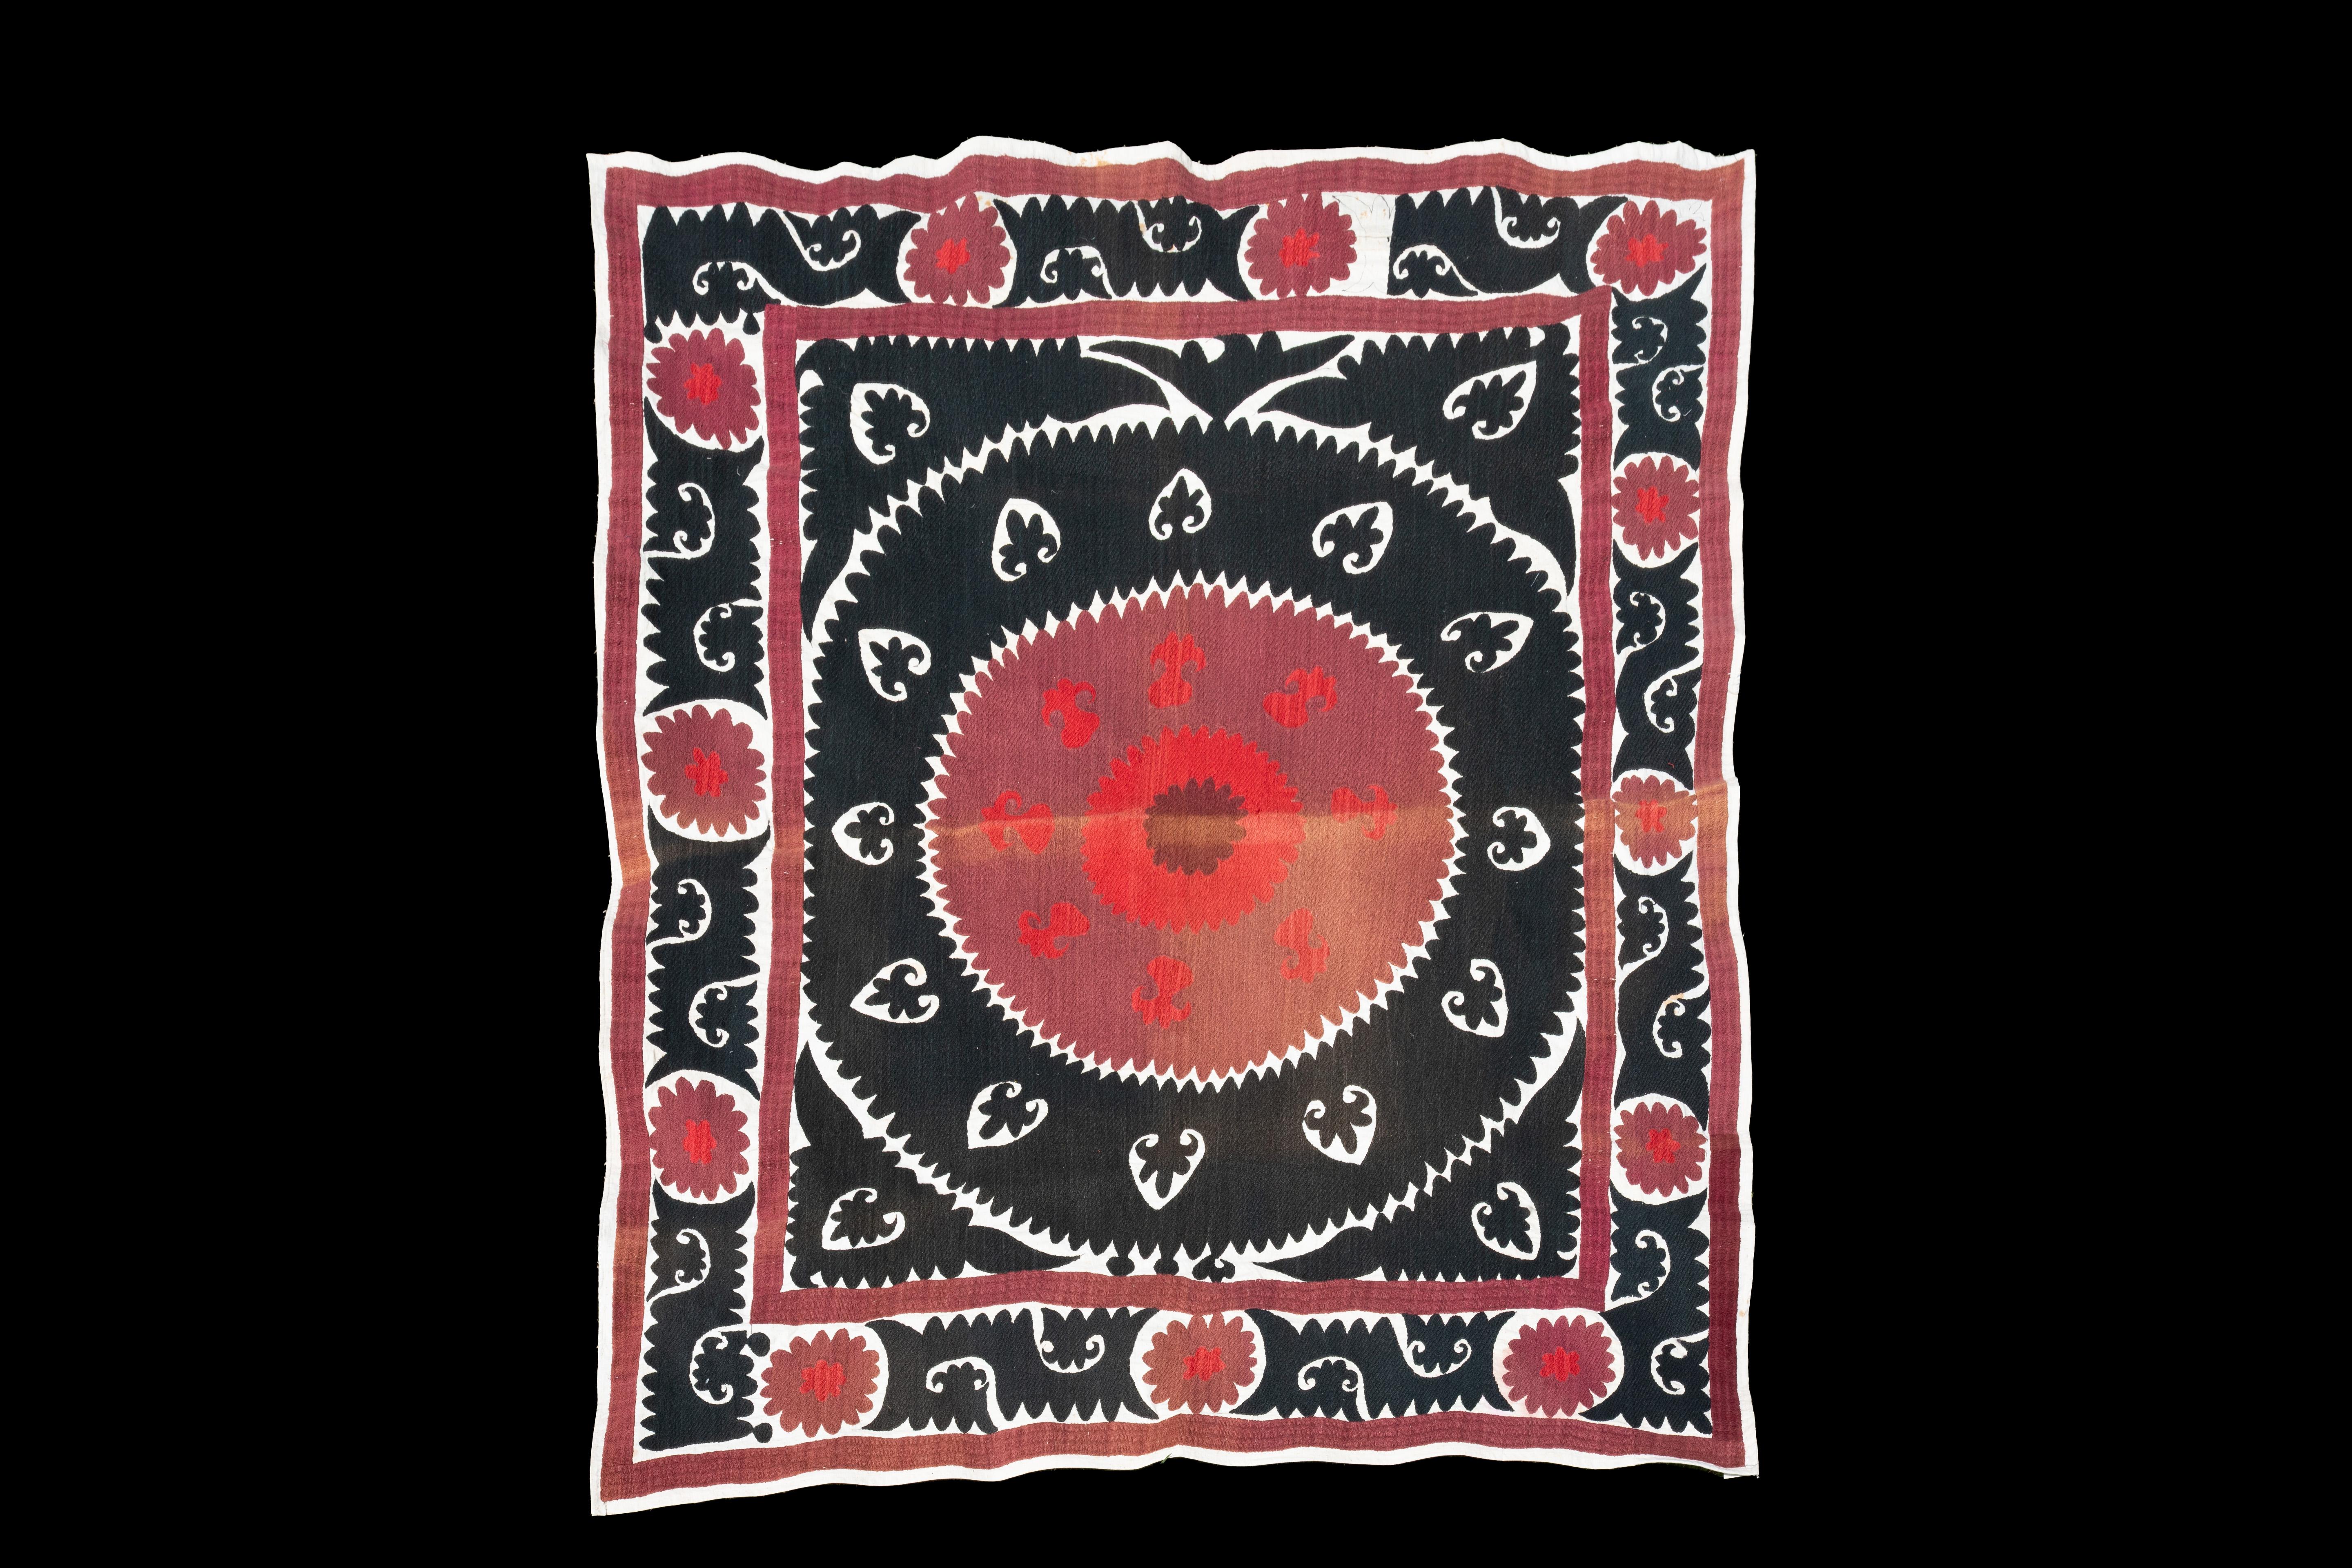 Handmade Vintage Cotton Suzani, Red, Maroon, and Charcoal

Richly hand-embroidered vintage Uzbek suzani in iconic black and copper oranges.
Sun burst flowers are ringed with black scrolls on natural cotton.
Cotton embroidery in tight stitches